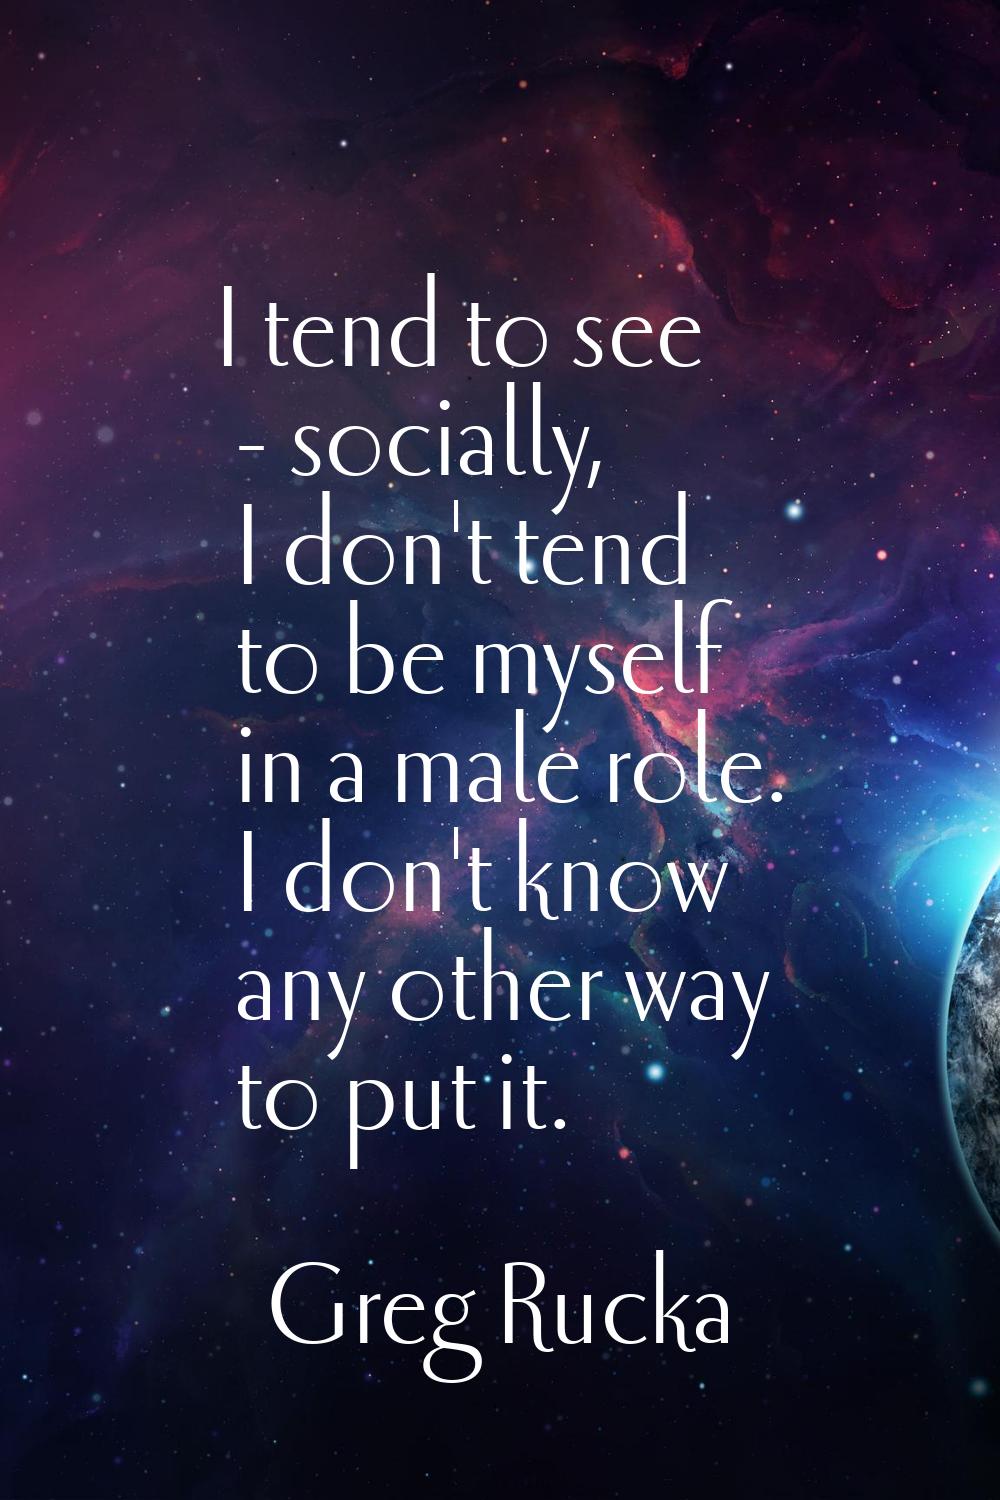 I tend to see - socially, I don't tend to be myself in a male role. I don't know any other way to p